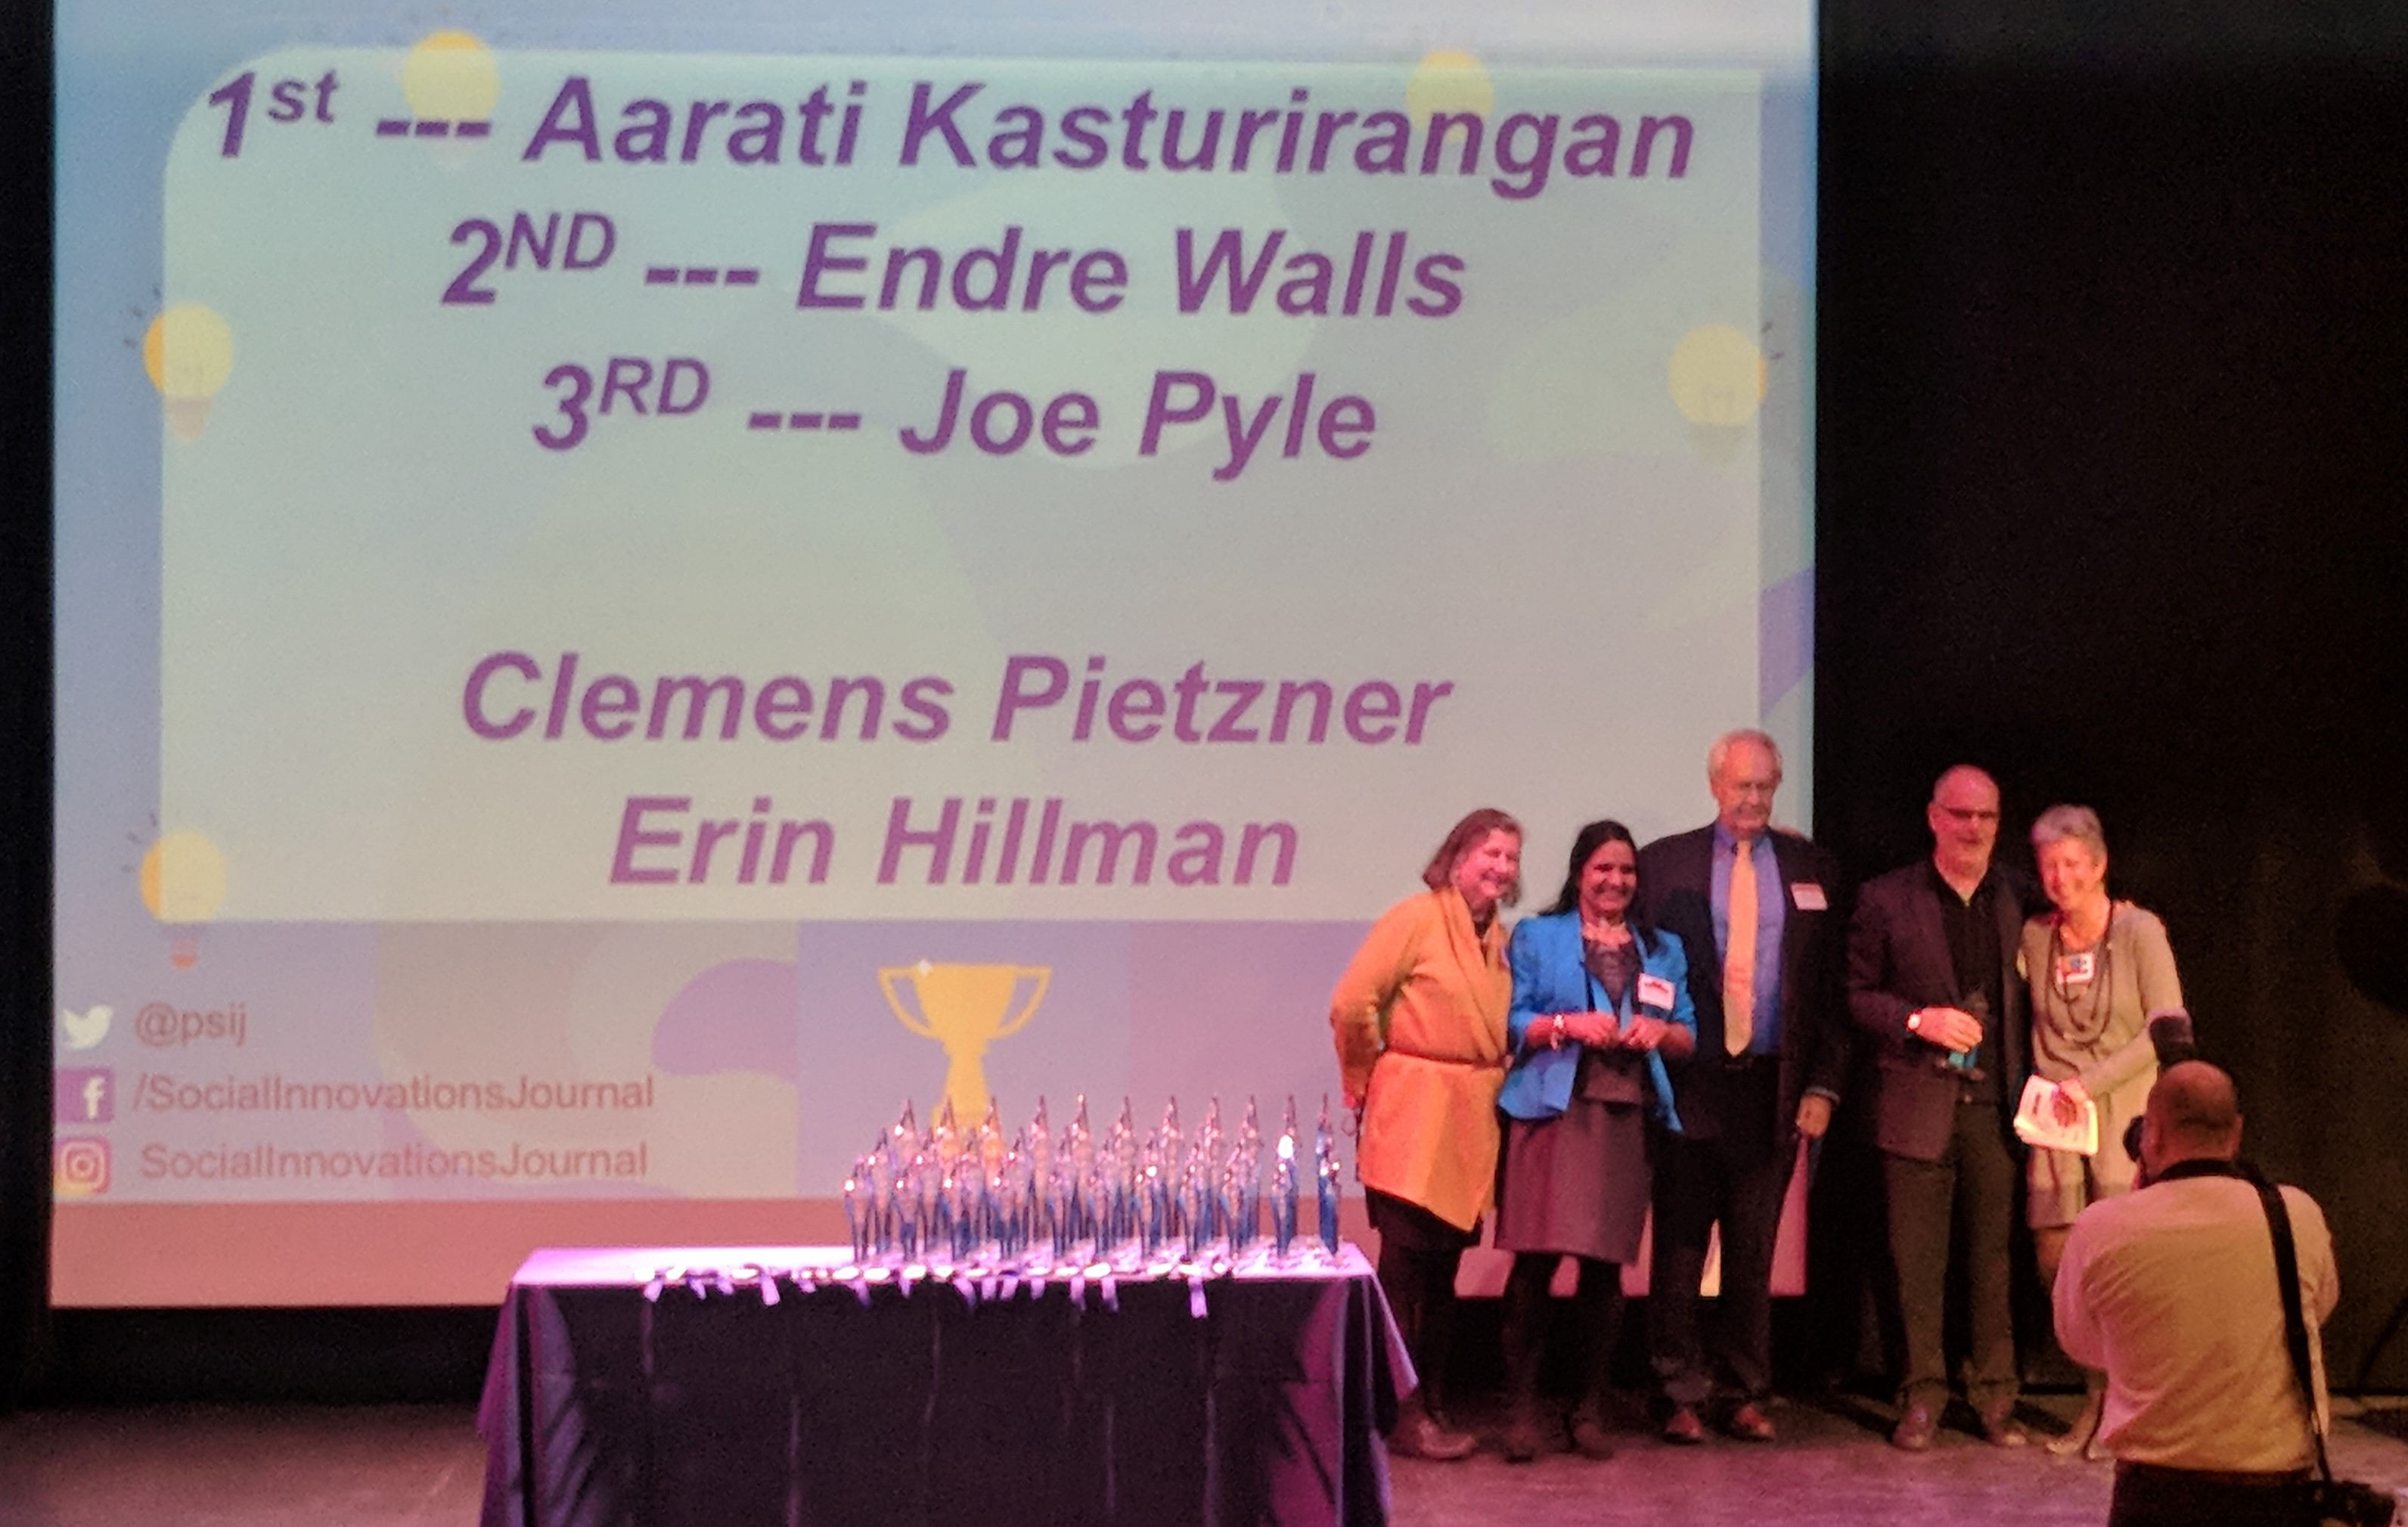 Aarati Kasturirangan poses with other honorees at social innovation awards ceremony